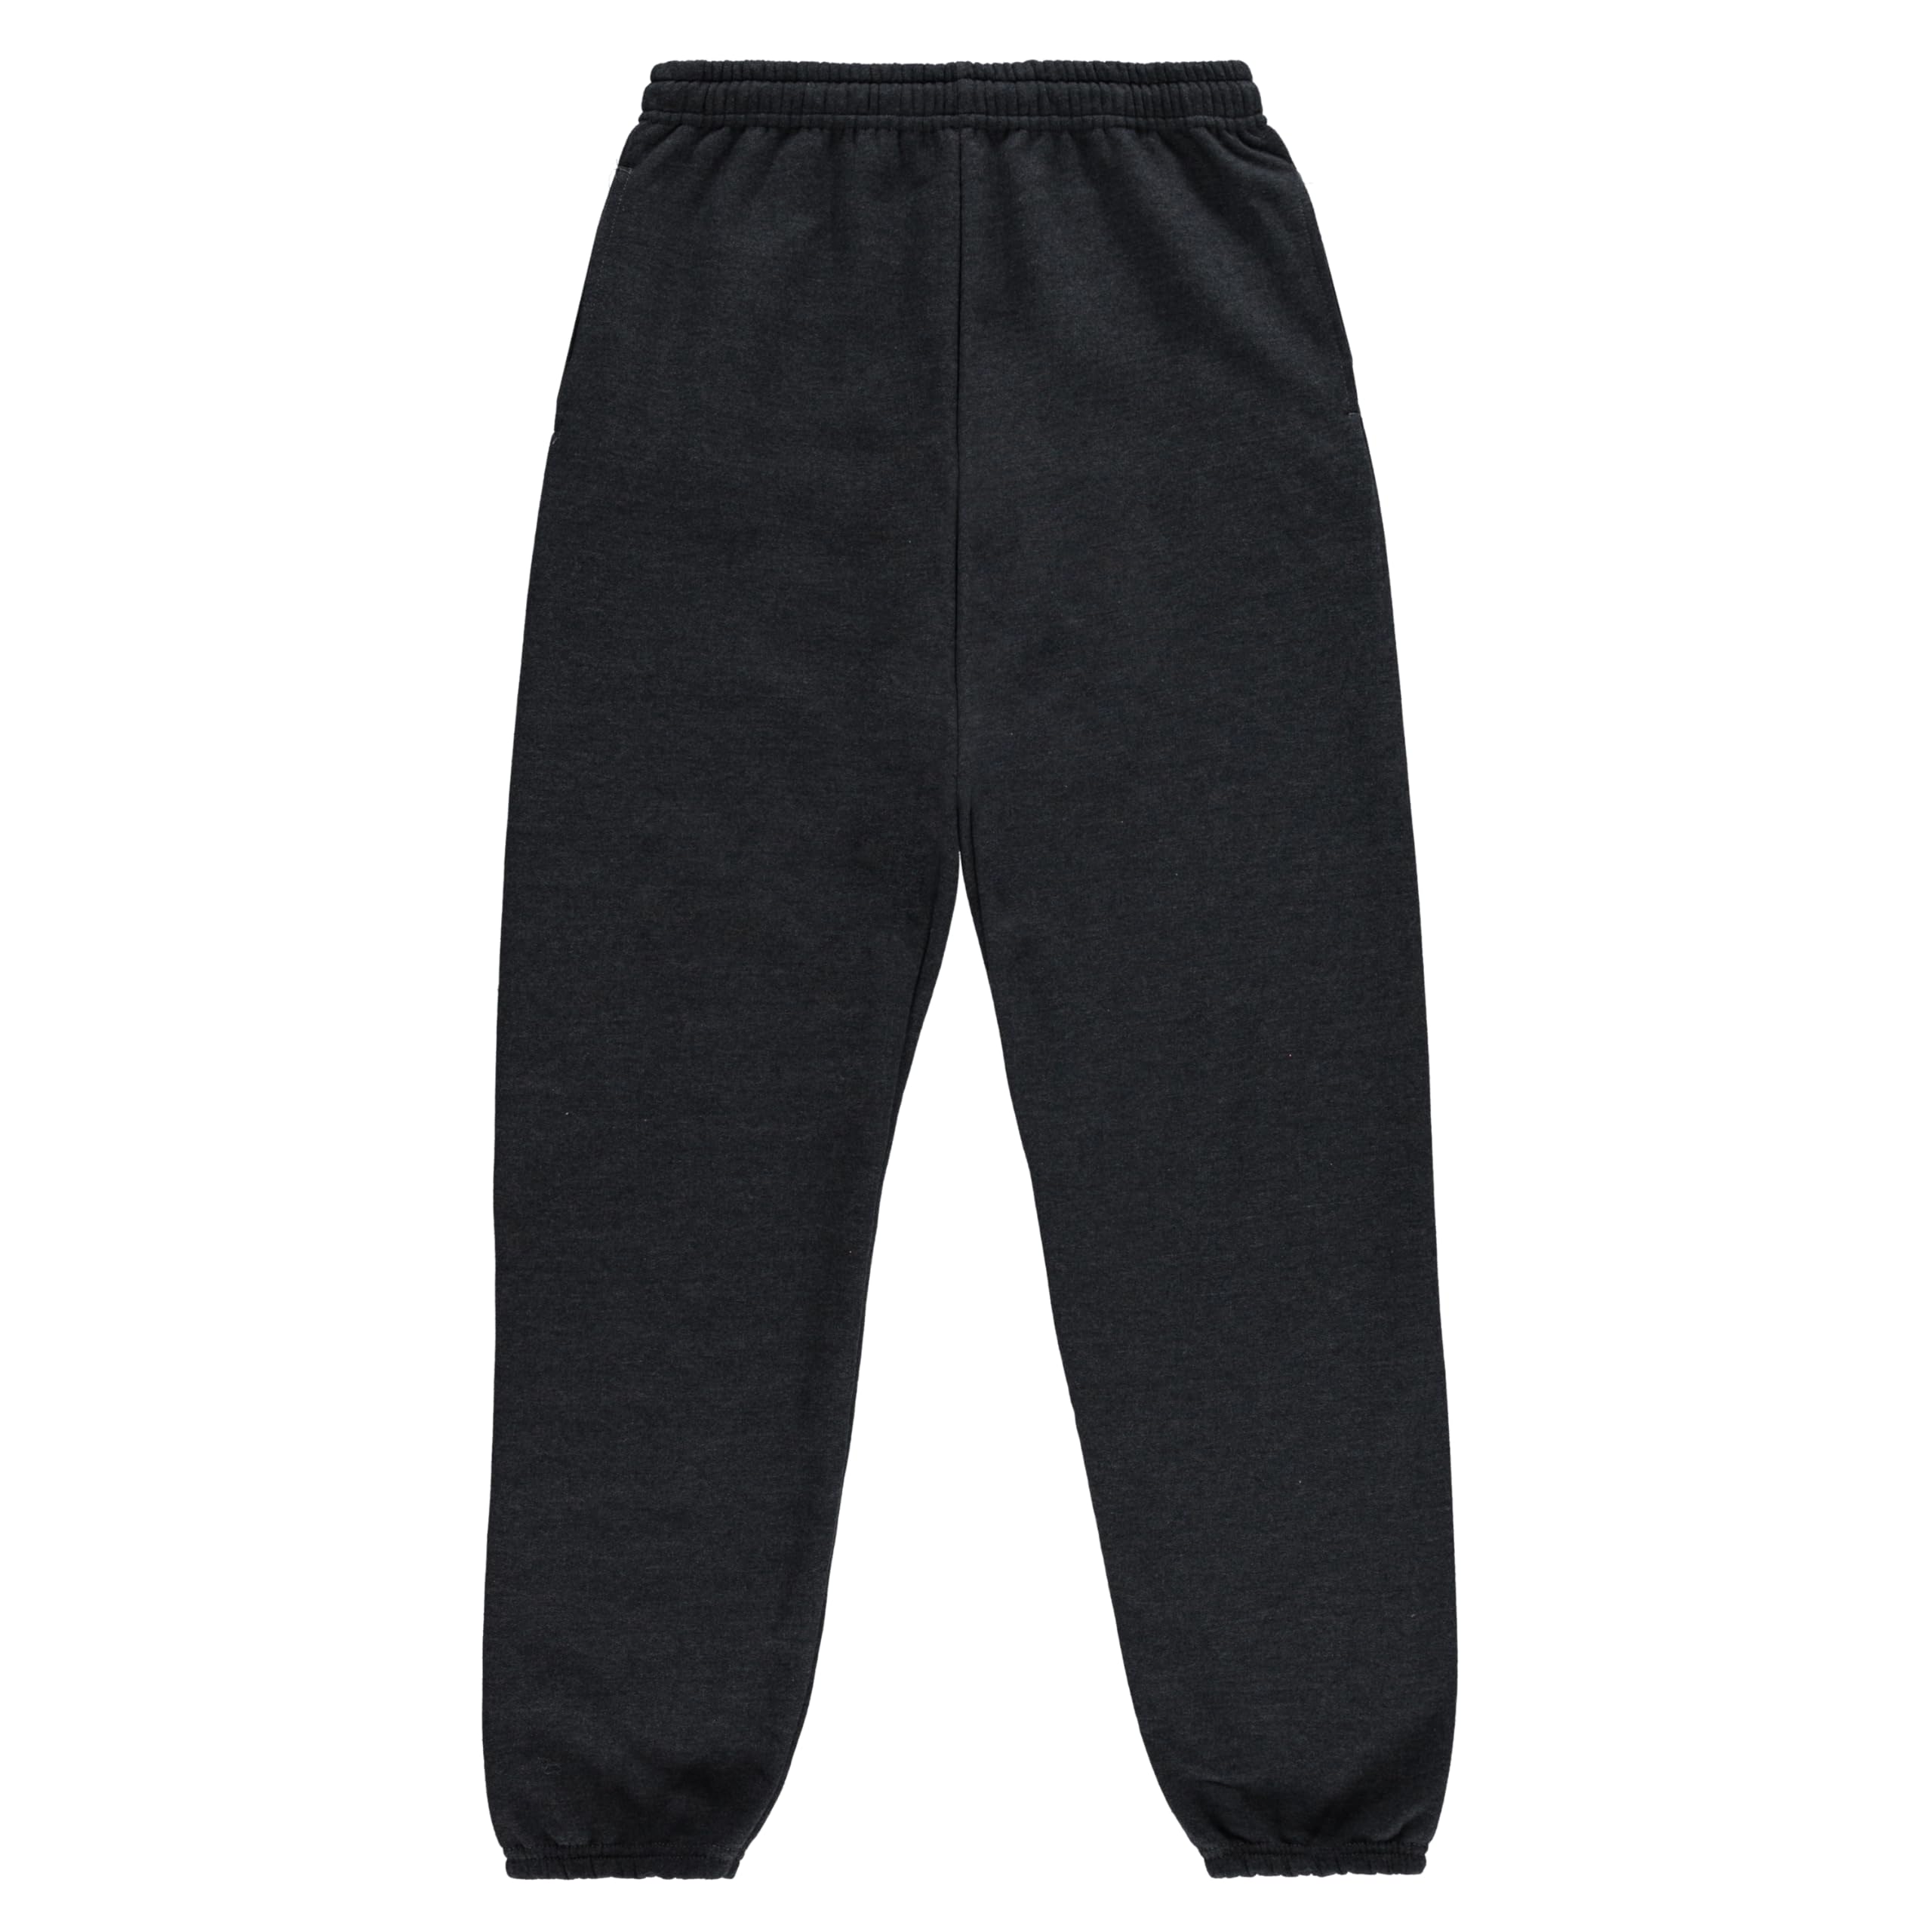 Yacht & Smith 36 Pack of Wholesale Childrens Unisex Jogger Bulk Sweatpants, Black Navy Gray, Comfy Lounge Joggers for Kids